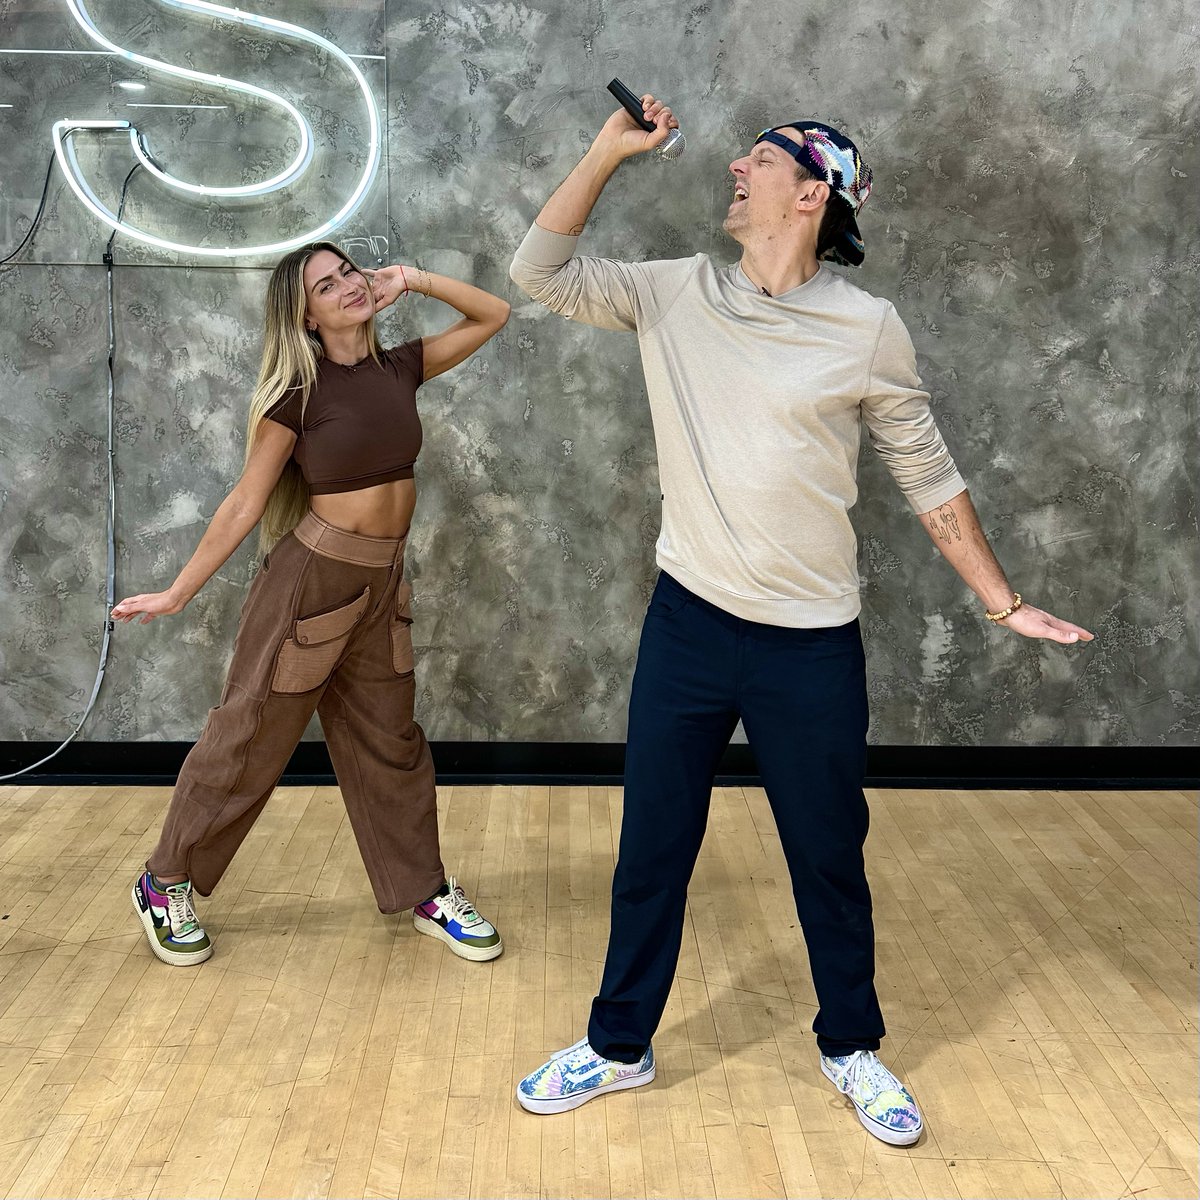 We know you'll belt out the lyrics during @jason_mraz and @DKaragach's Argentine Tango, but can you guess what song they are performing to for A Celebration of Taylor Swift on #DWTS? 🤔 #DWTSxTaylorSwift @taylorswift13